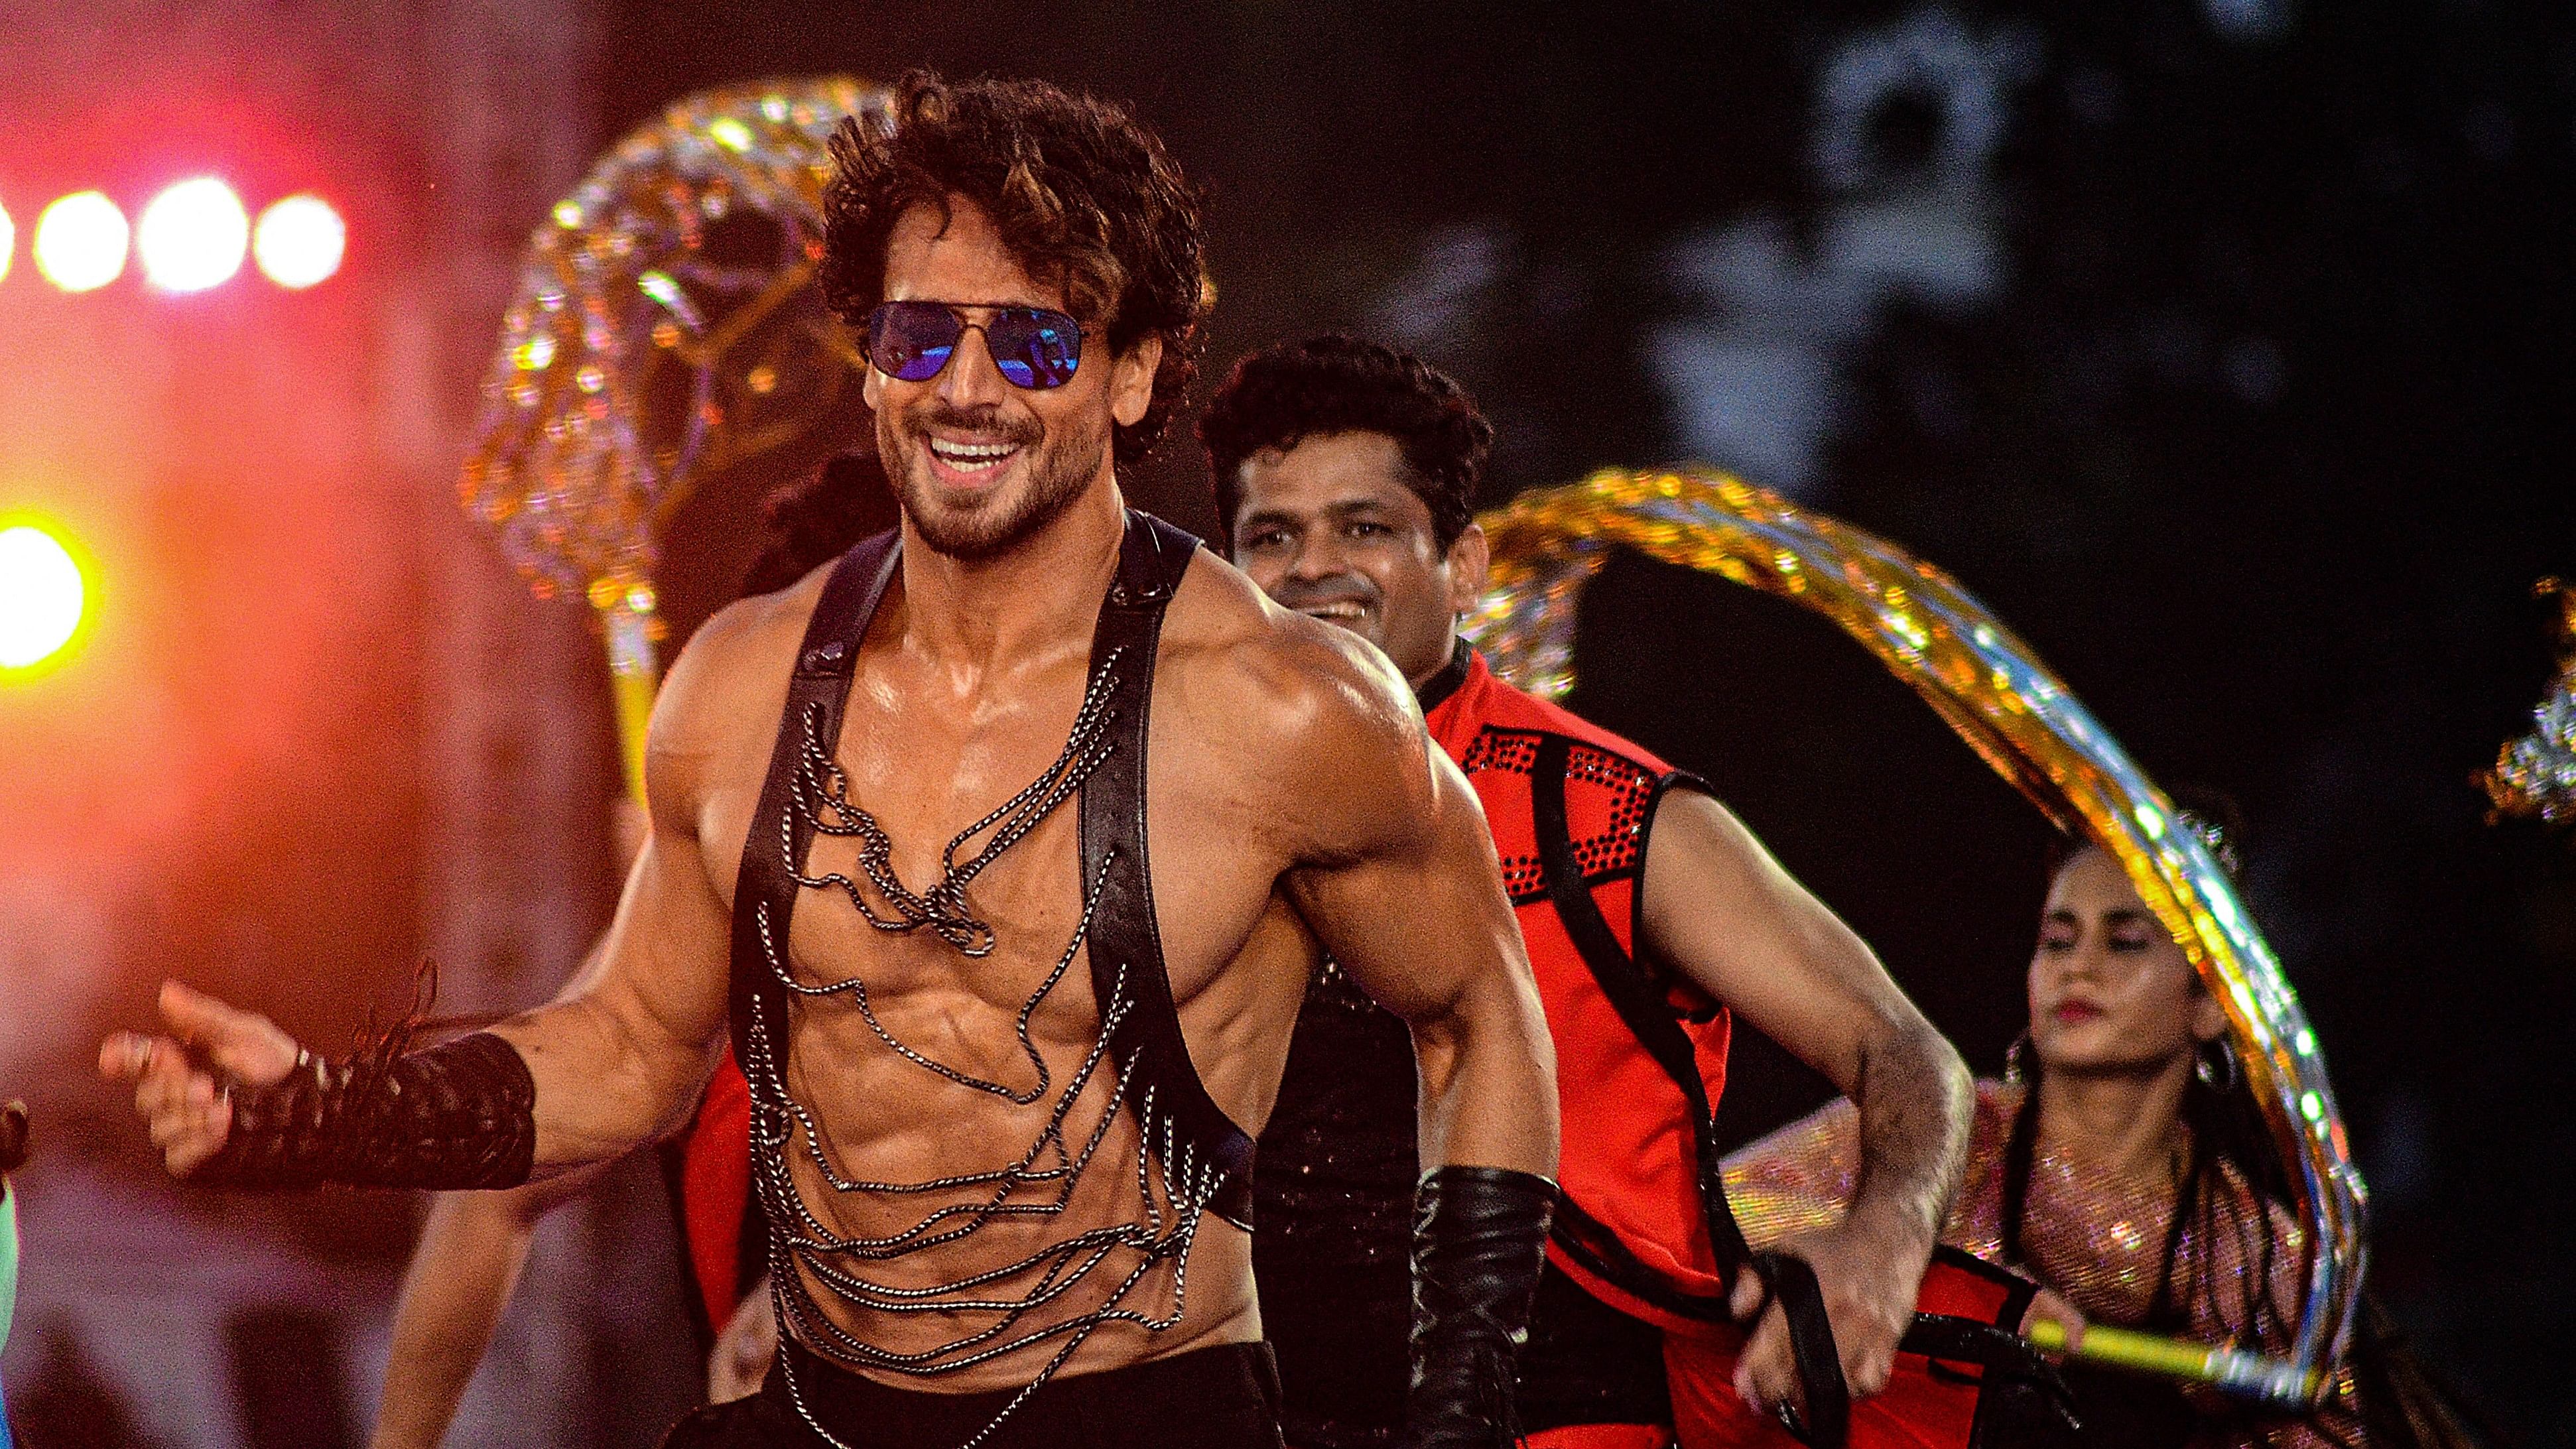 <div class="paragraphs"><p>Bollywood actor Tiger Shroff performs at the opening ceremony of the Uttar Pradesh T20 Cricket tournament at Green Park Stadium, in Kanpur.&nbsp;</p></div>